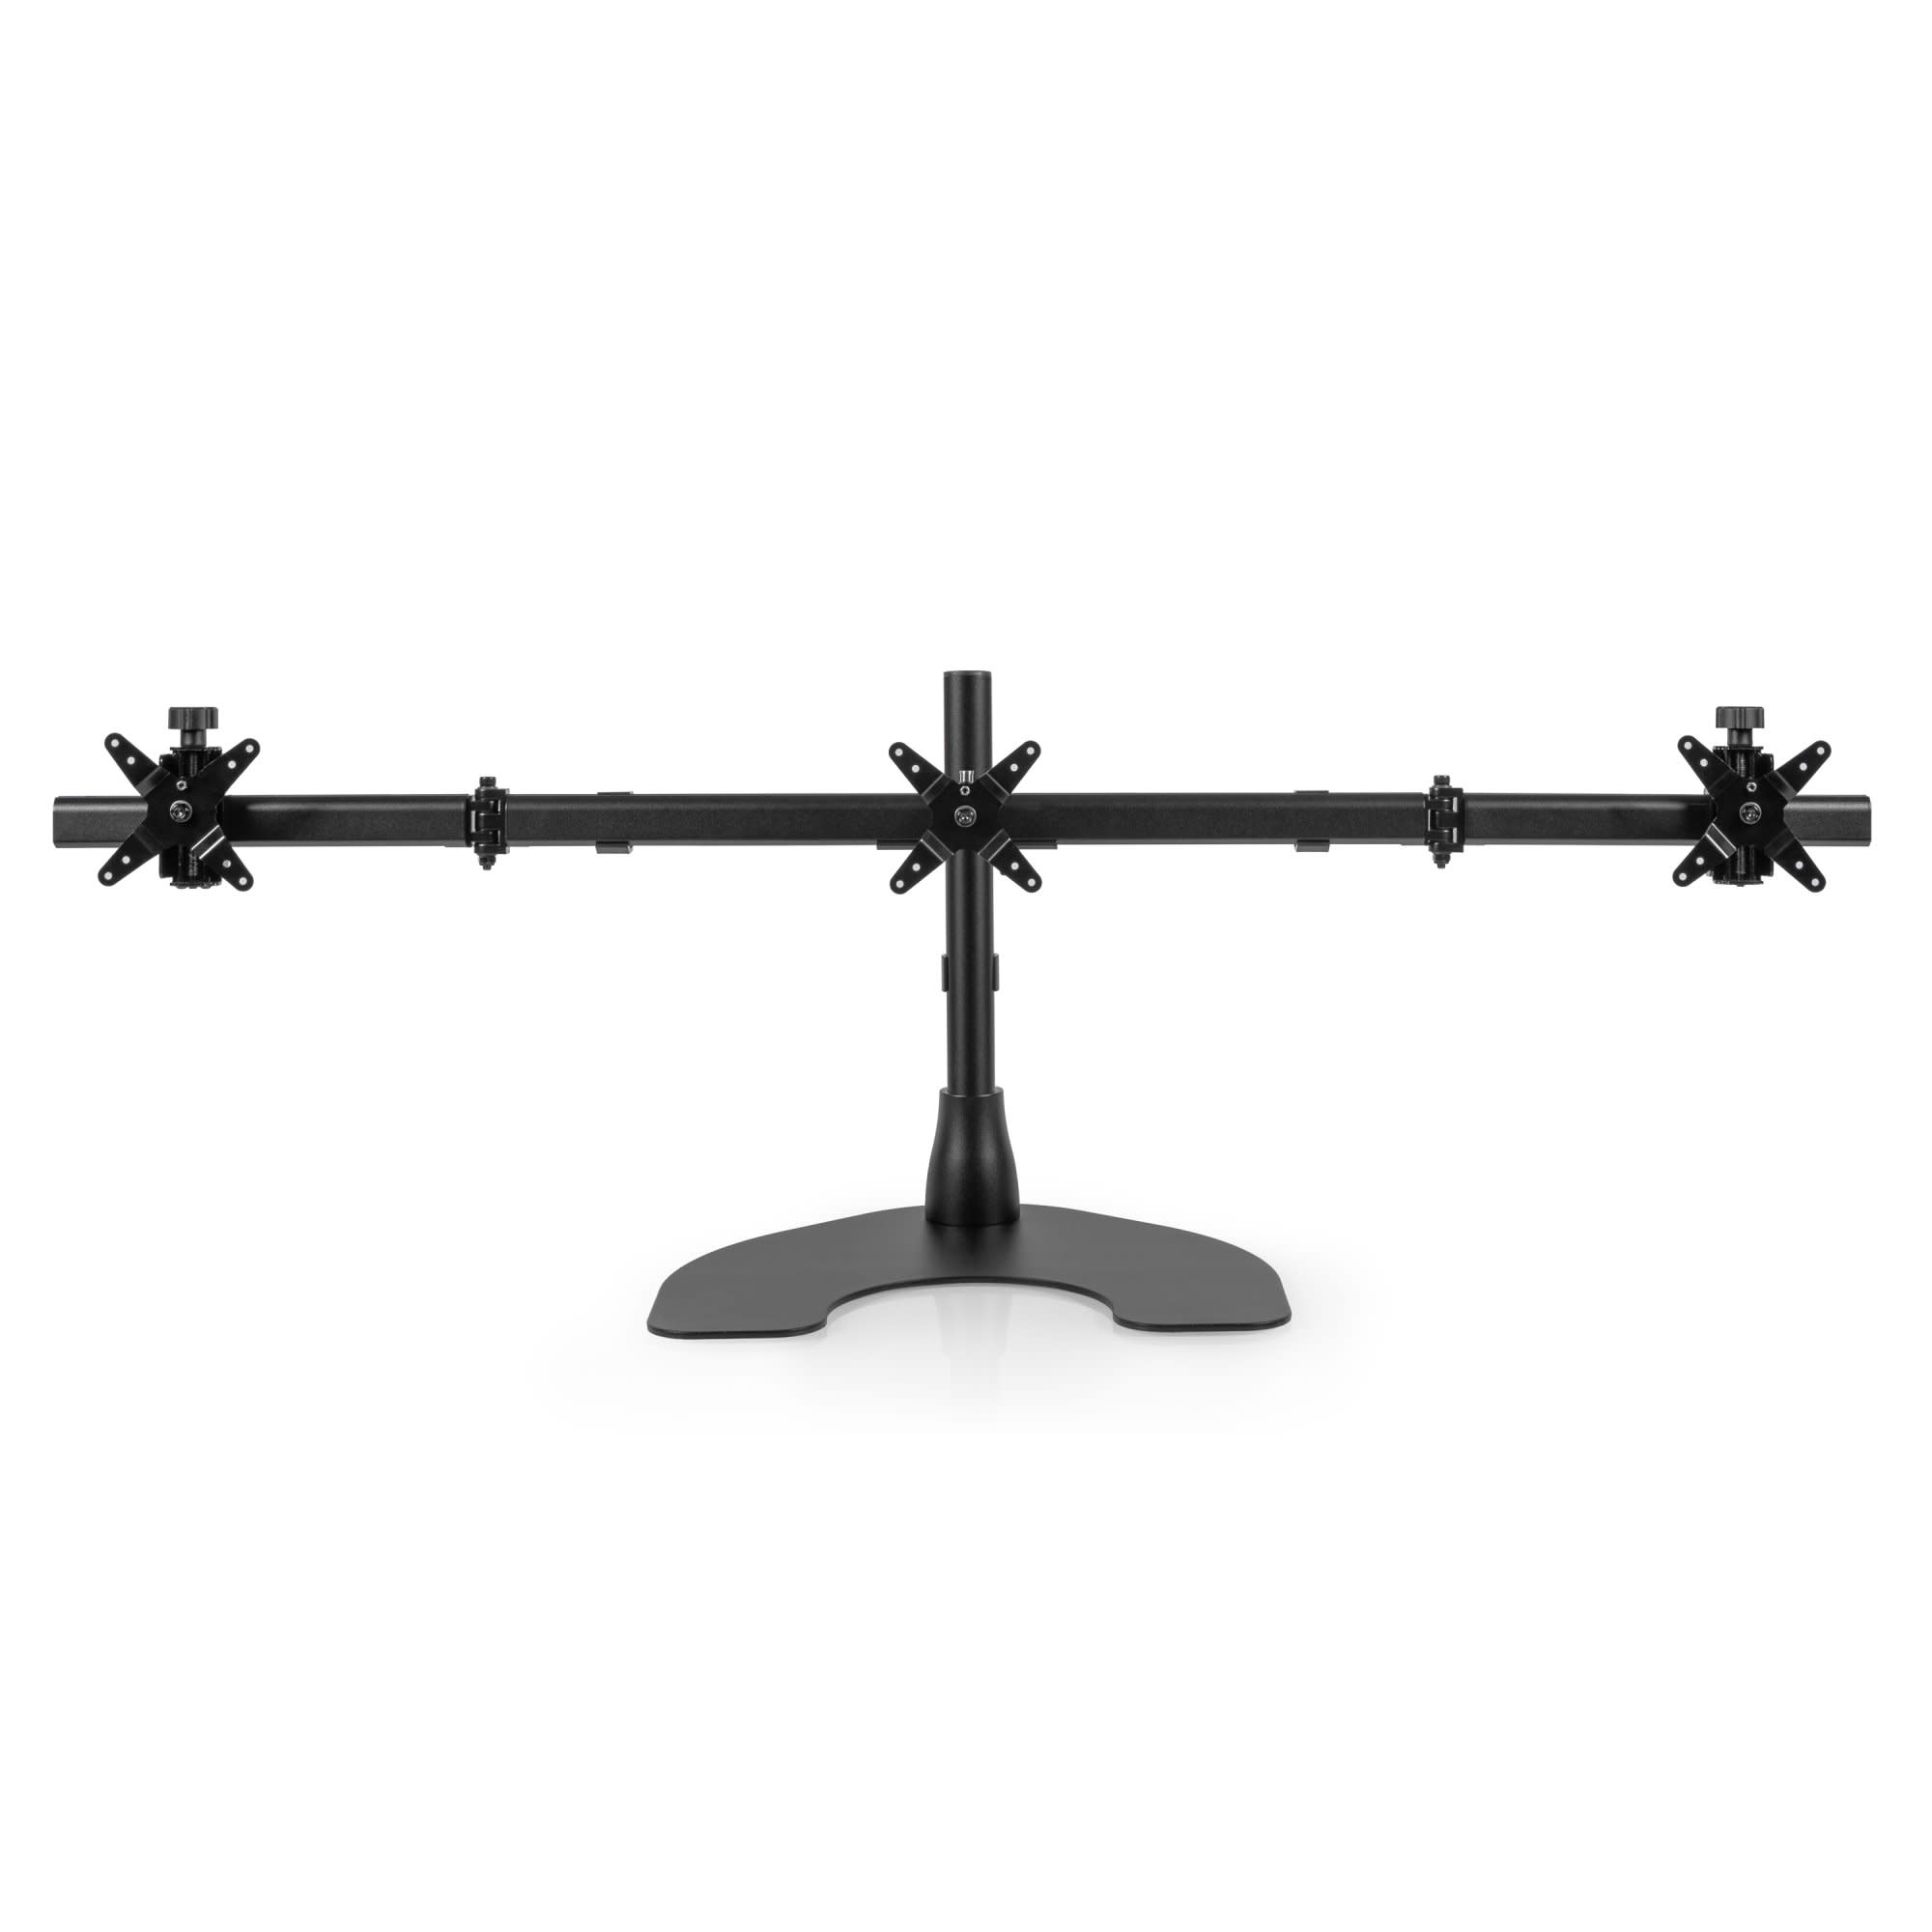 Ergotech Triple LCD Horizontal Desk Stand with Standard Wings - image 1 of 2